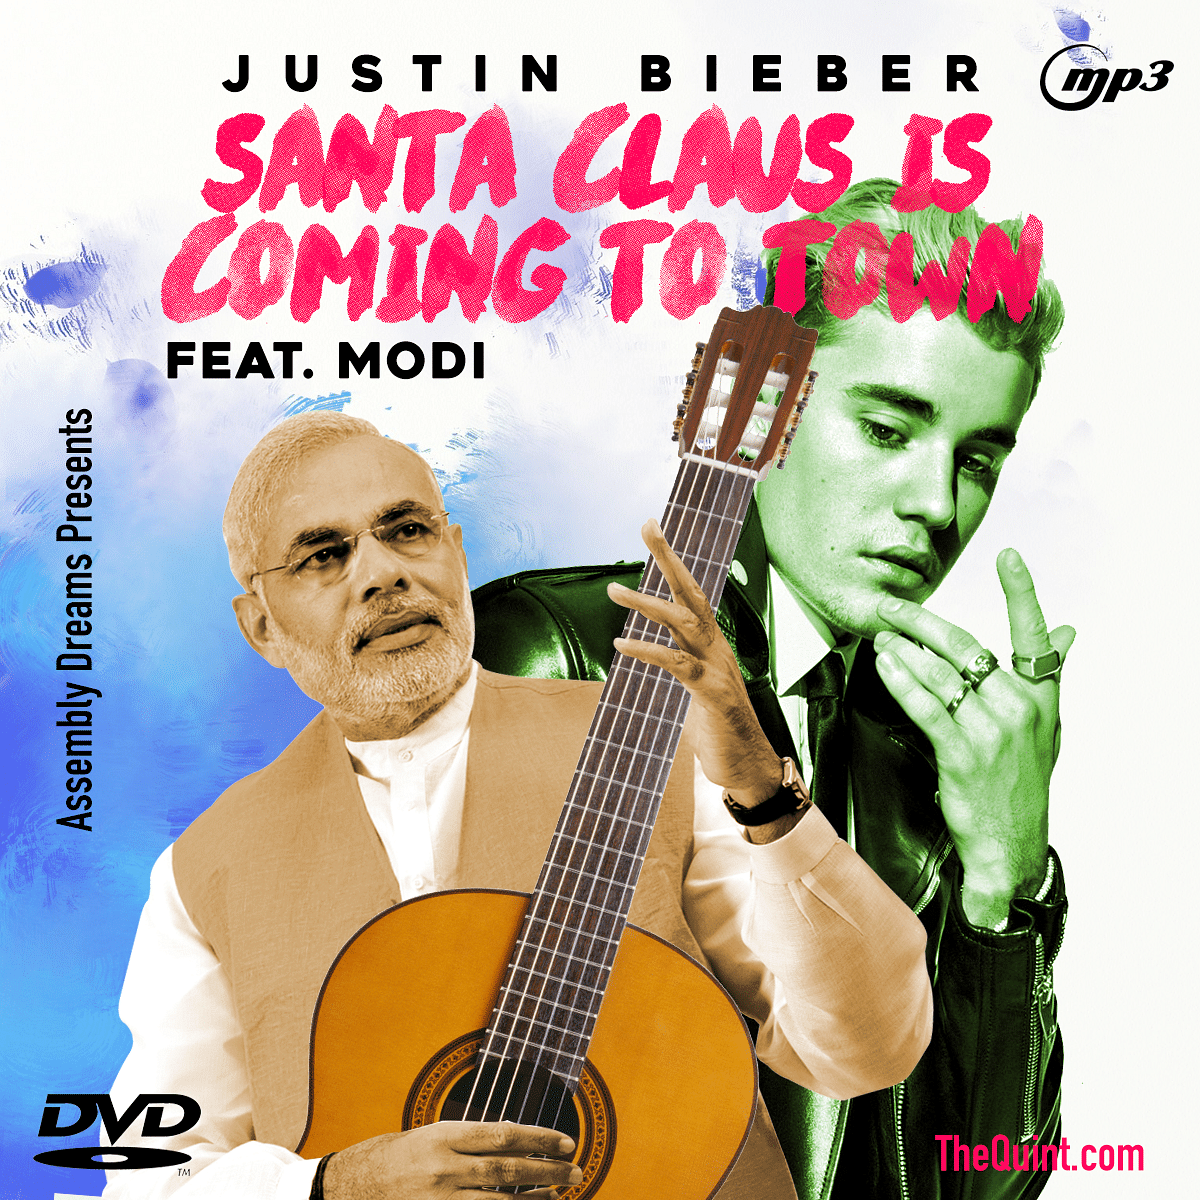 Justin Bieber is coming to India, and he should sing these songs for Rahul-Akhilesh, AAP, Badals, Mayawati & BJP!